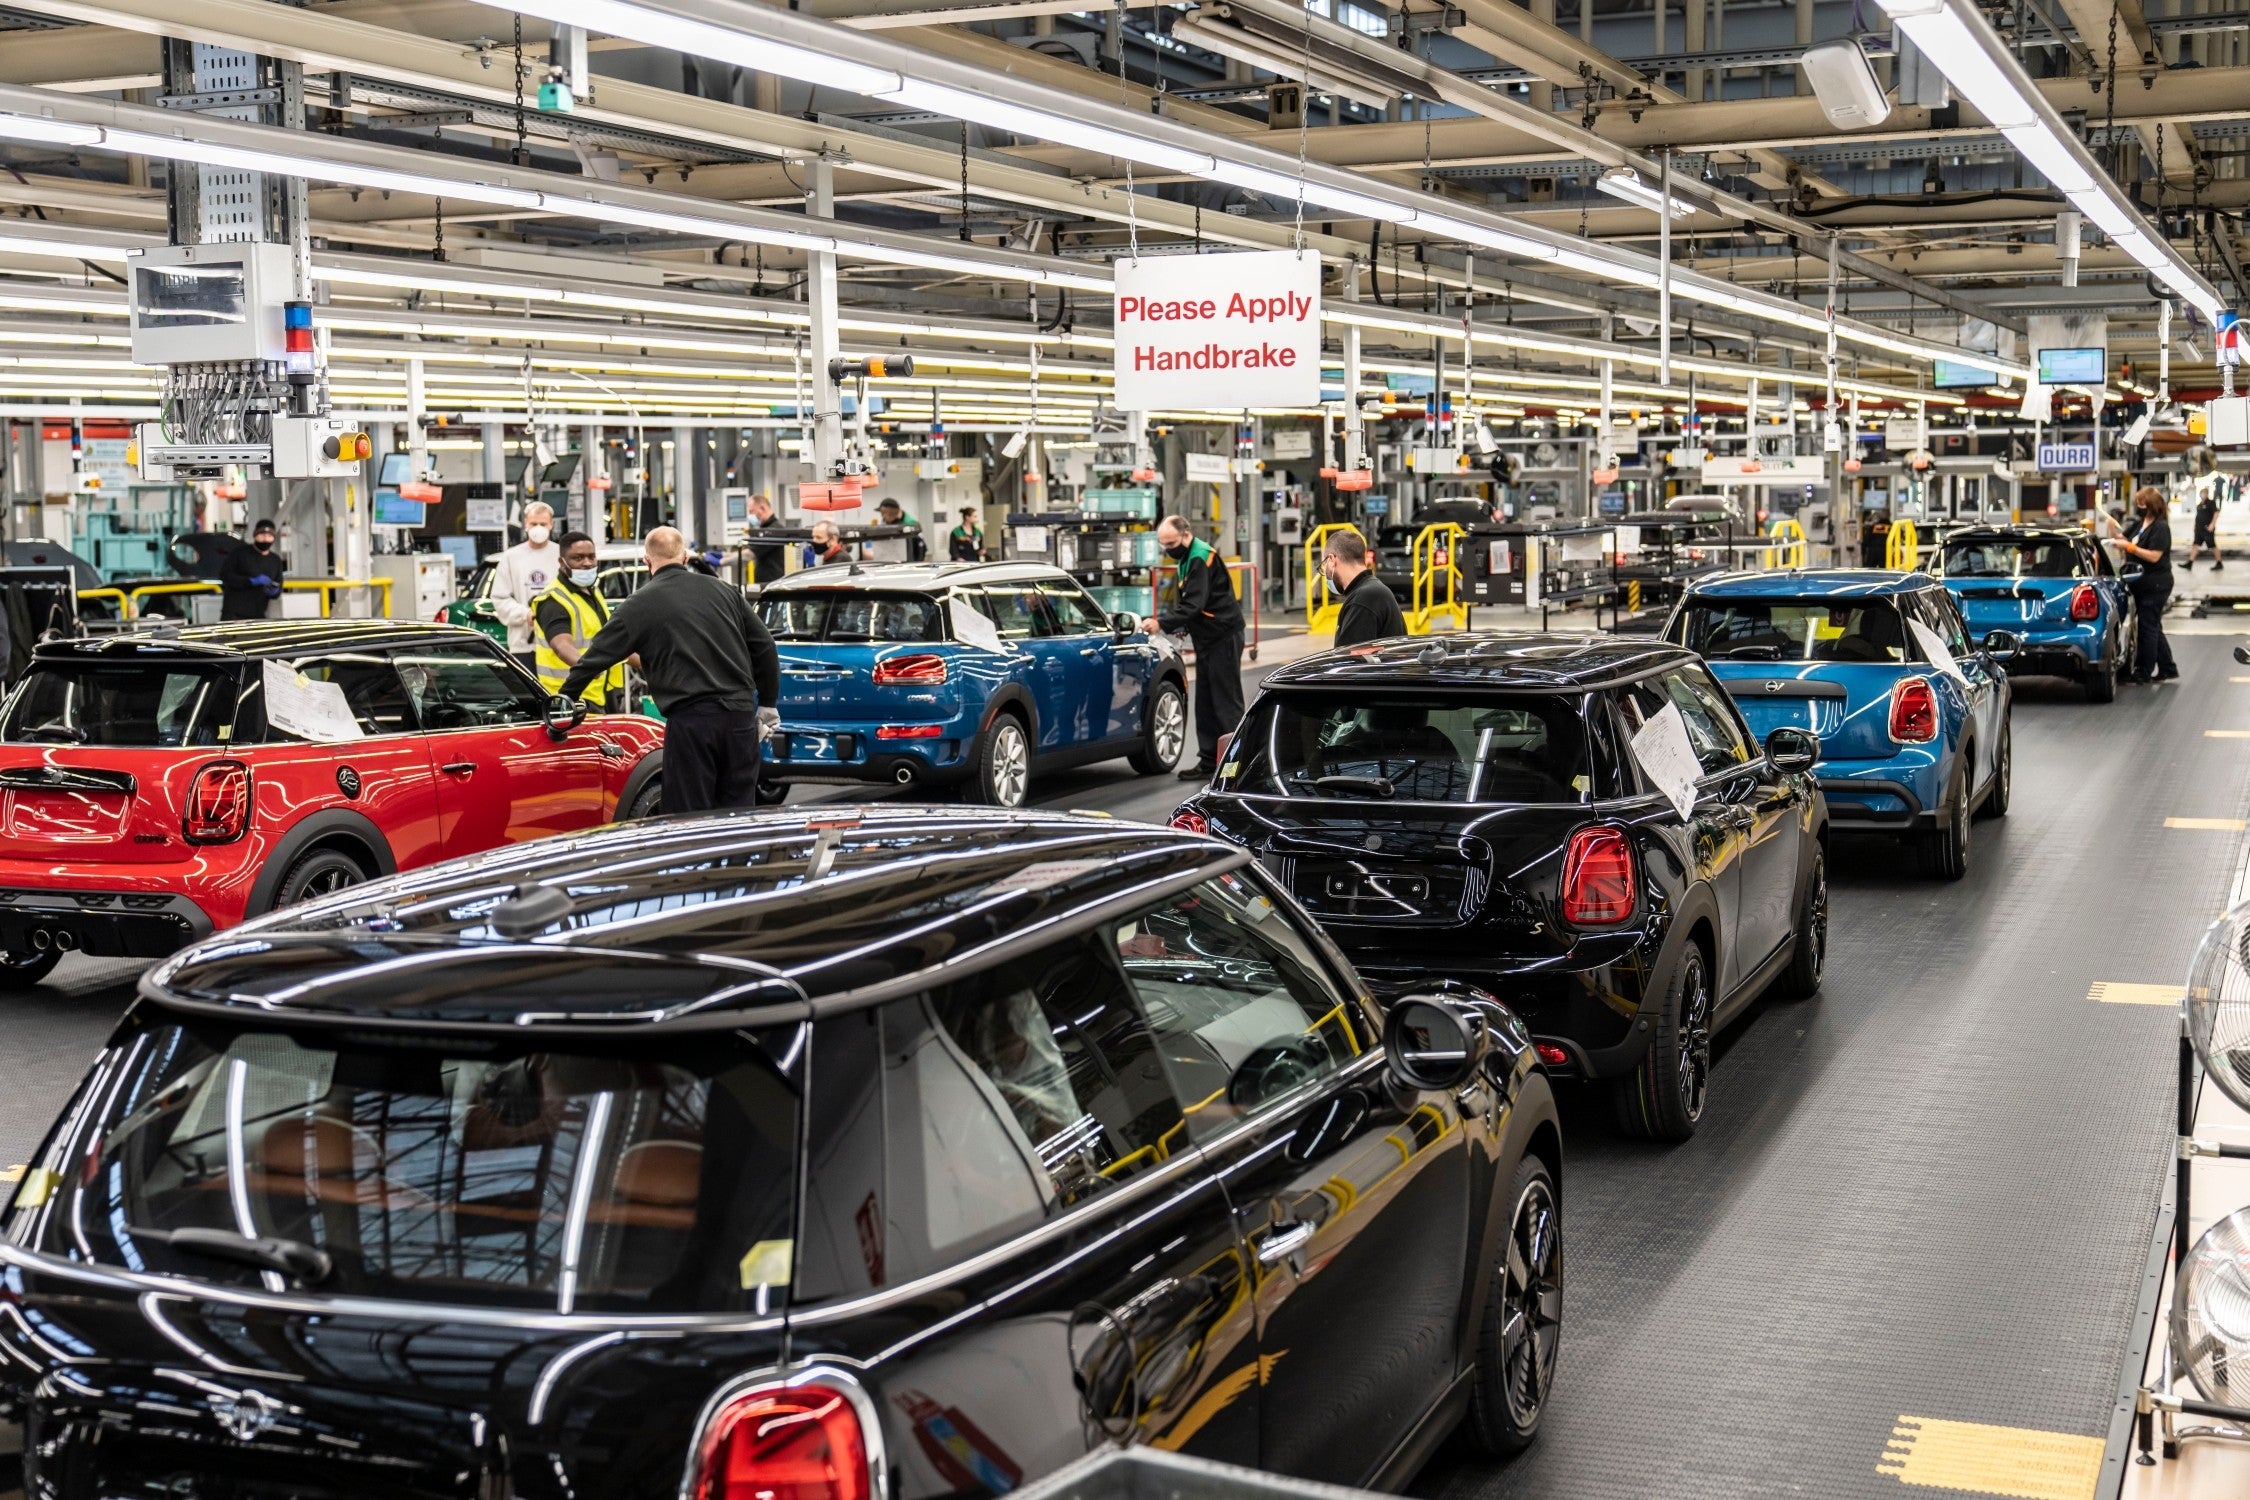 UKRAINE CRISIS UPDATE – Manufacturing suspensions at BMW and VW in Western Europe